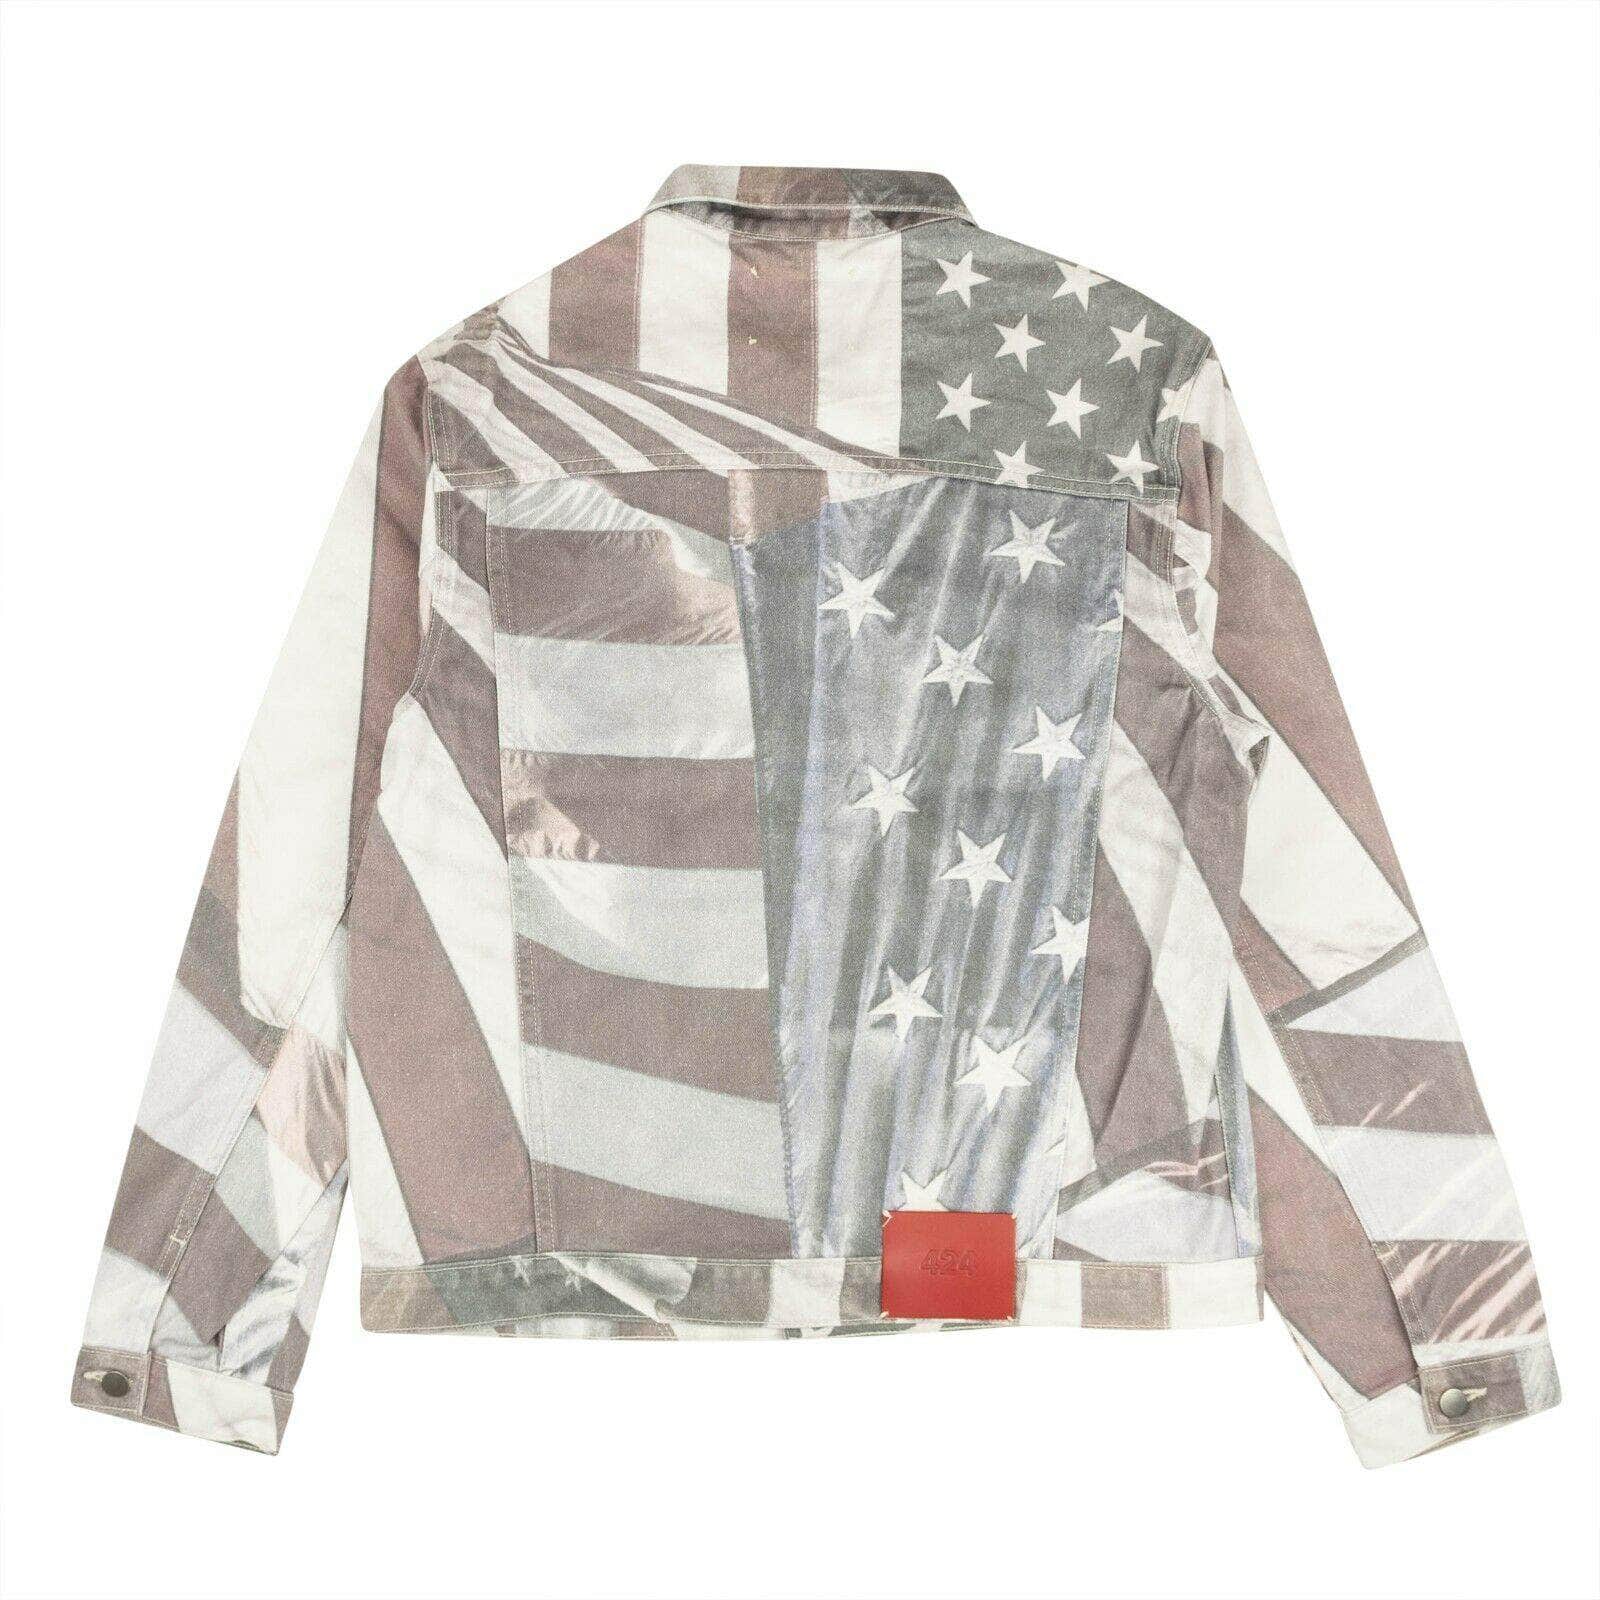 424 ON FAIRFAX 250-500, 424-on-fairfax, channelenable-all, chicmi, couponcollection, gender-mens, main-clothing, mens-denim-jackets, size-l S / 424C-AW19-0002-MUL American Flag Denim Jacket 95-424-0006/S 95-424-0006/S